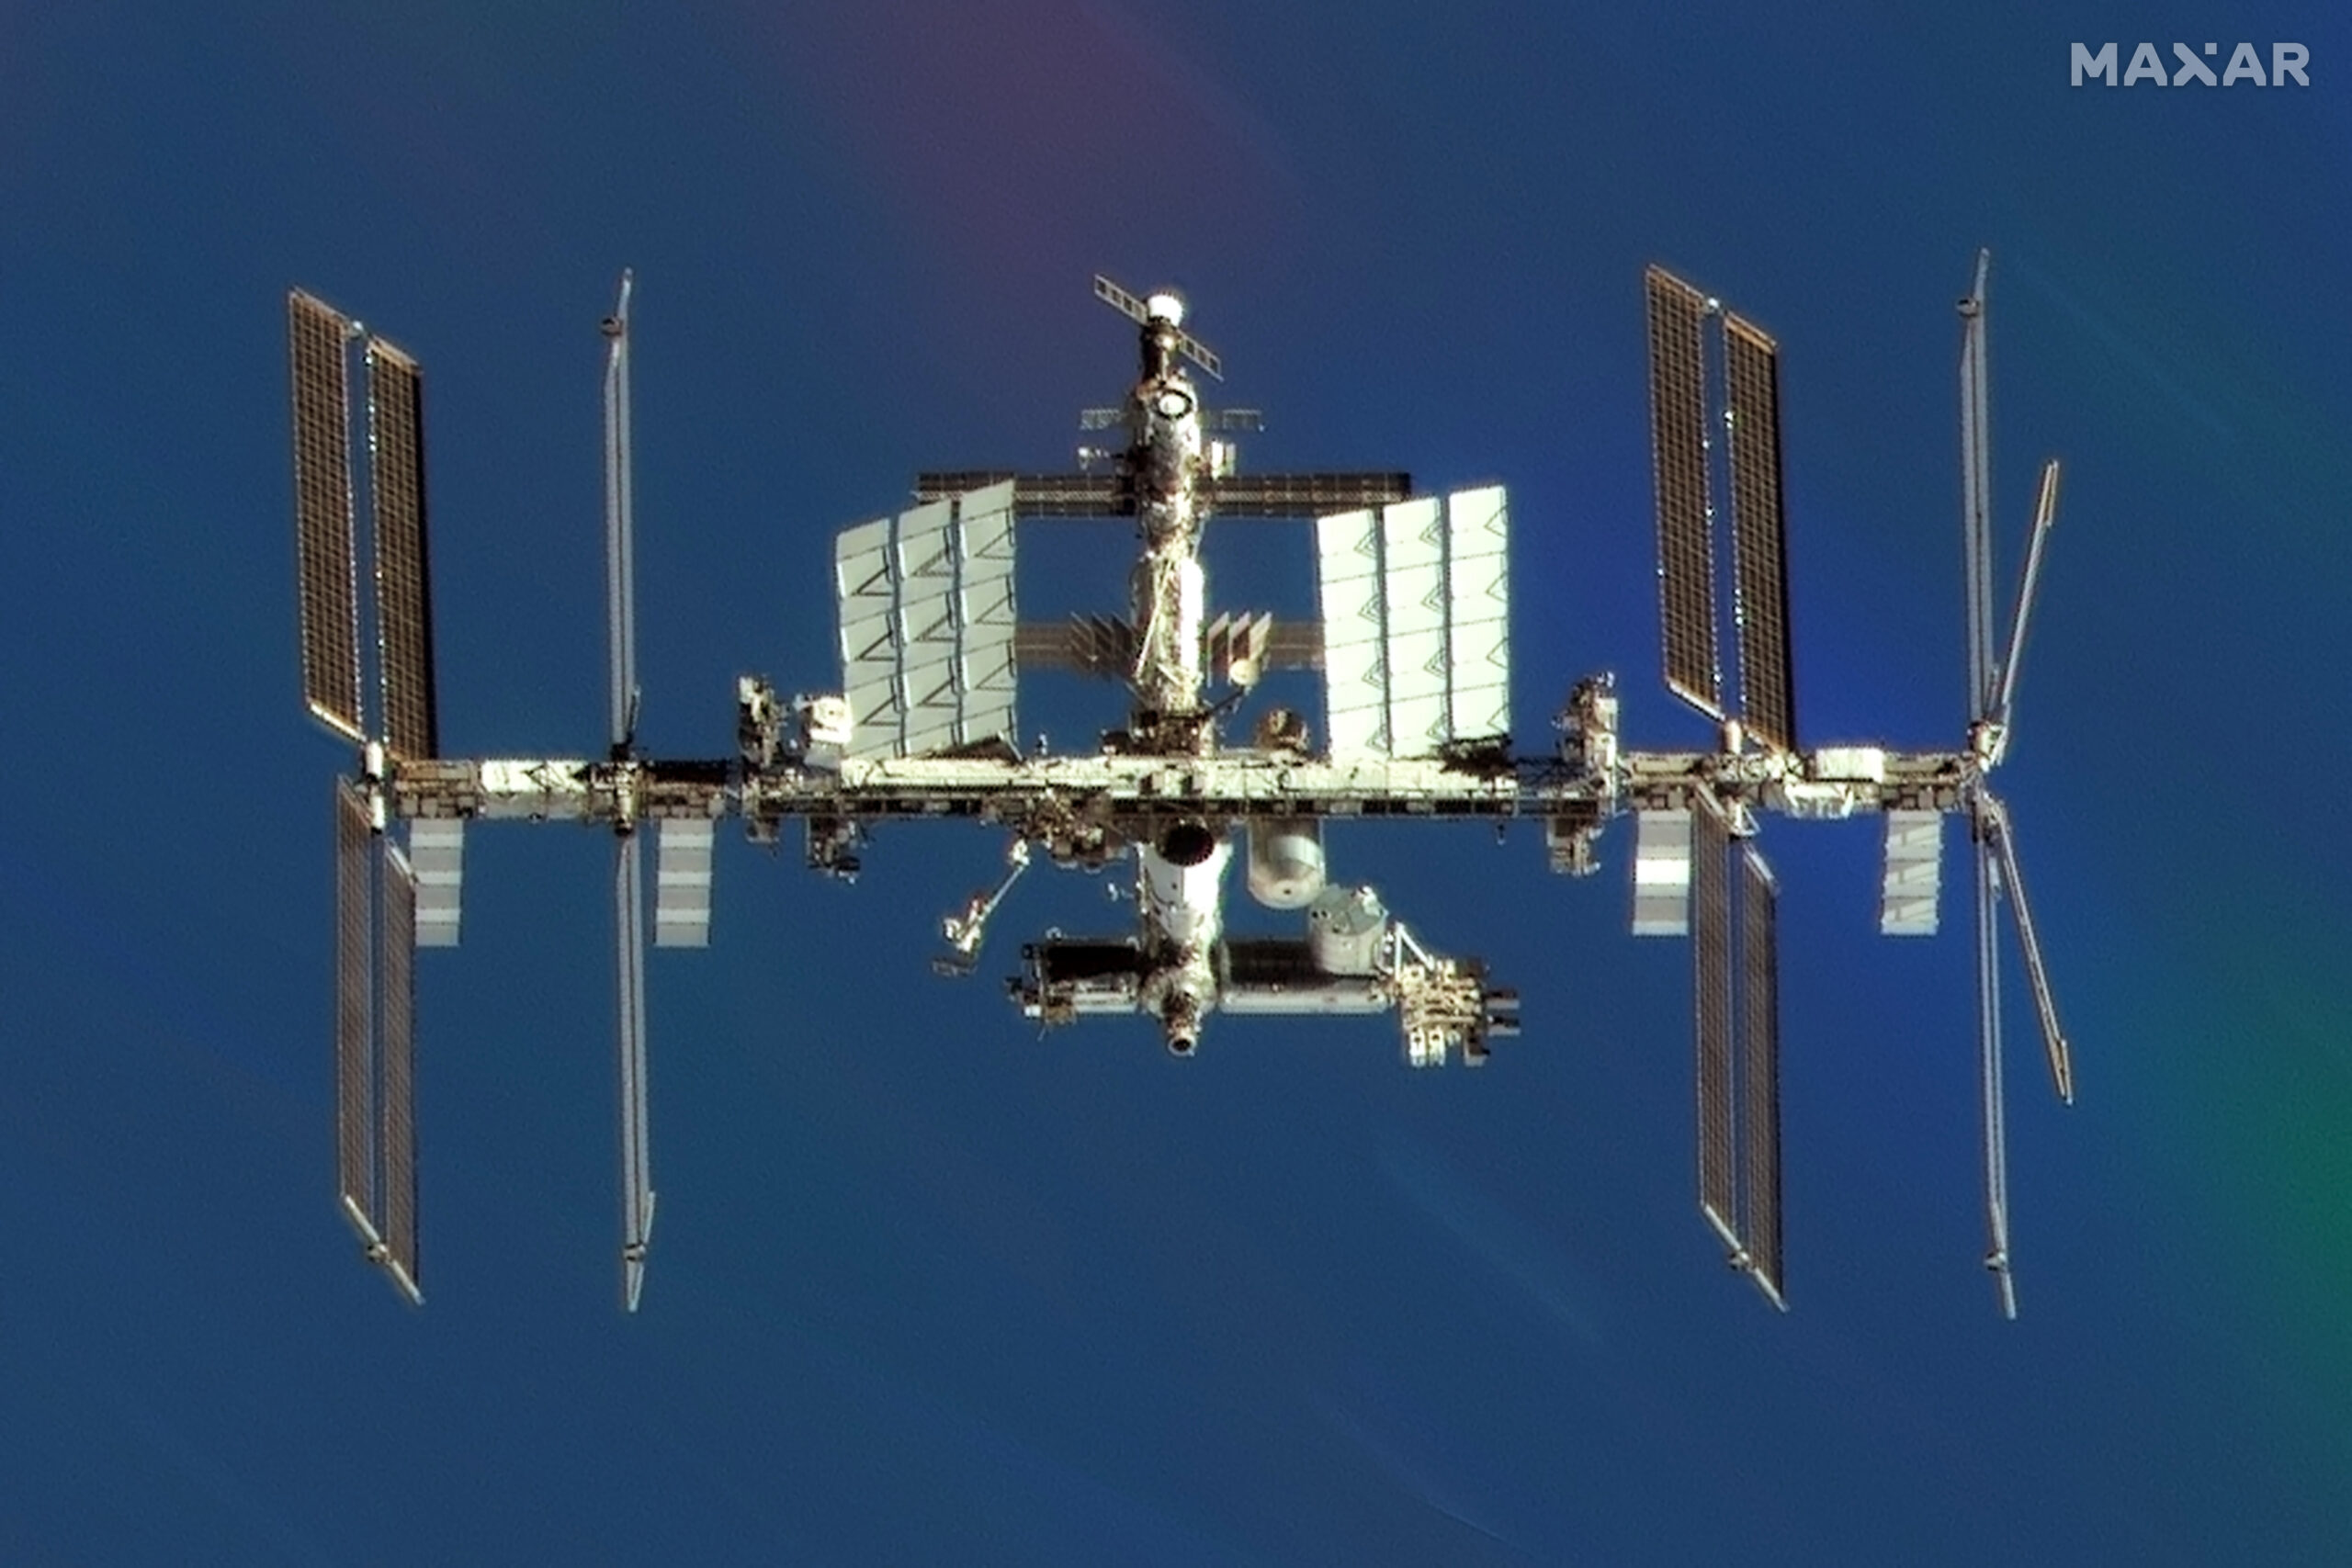 Photo of the International Space Station taken by Maxar’s WorldView-3 in September 2022. Credit: Maxar Technologies